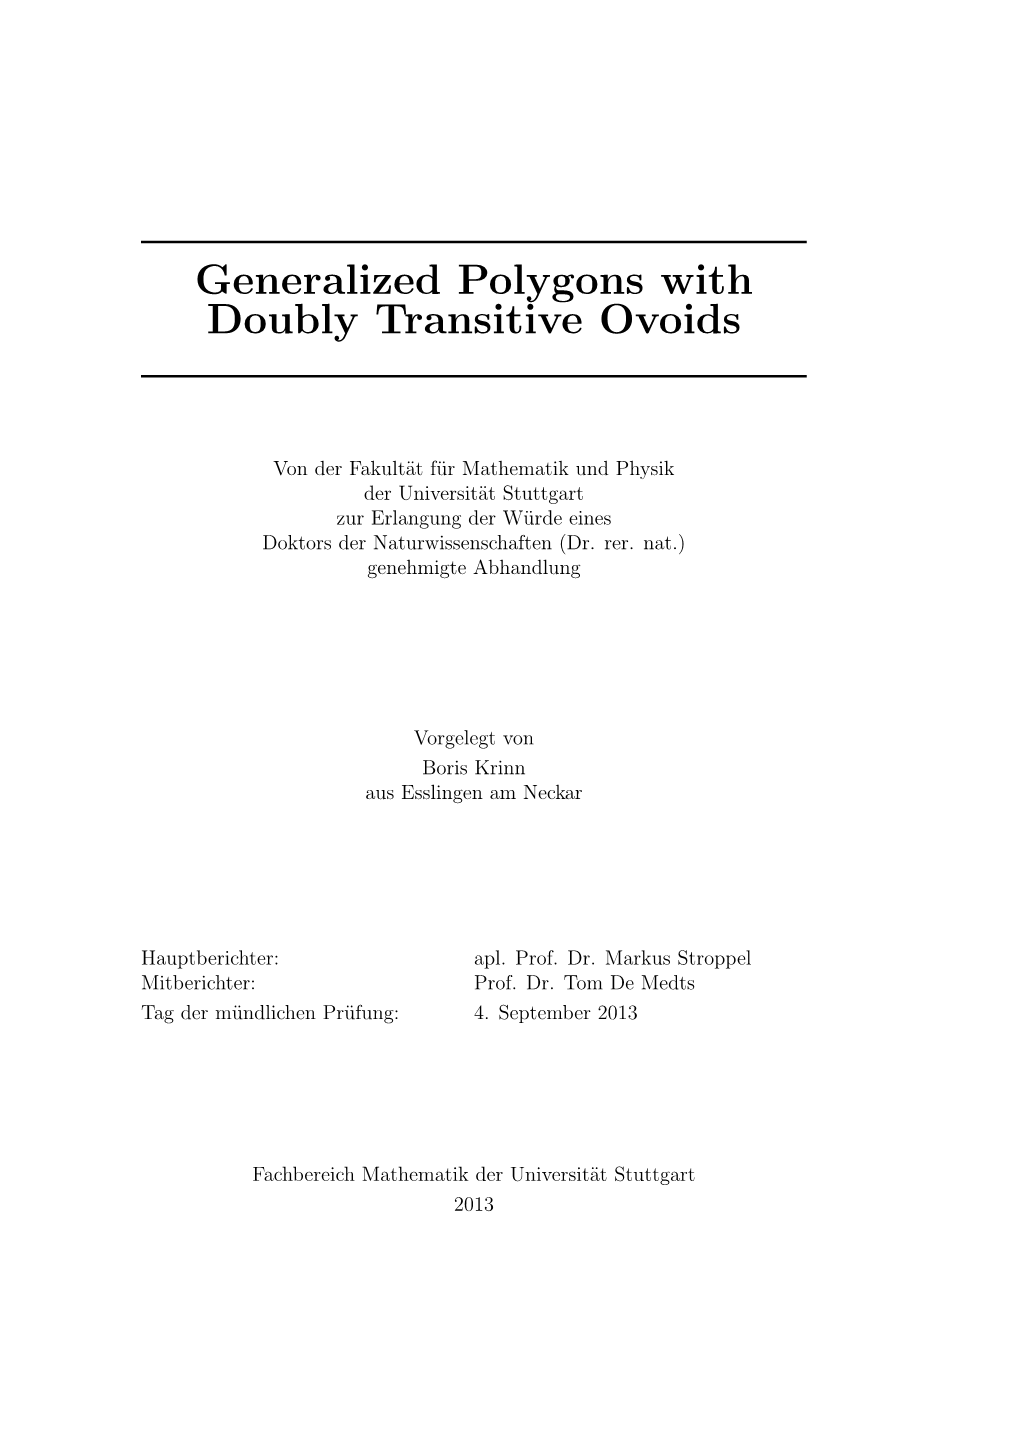 Generalized Polygons with Doubly Transitive Ovoids